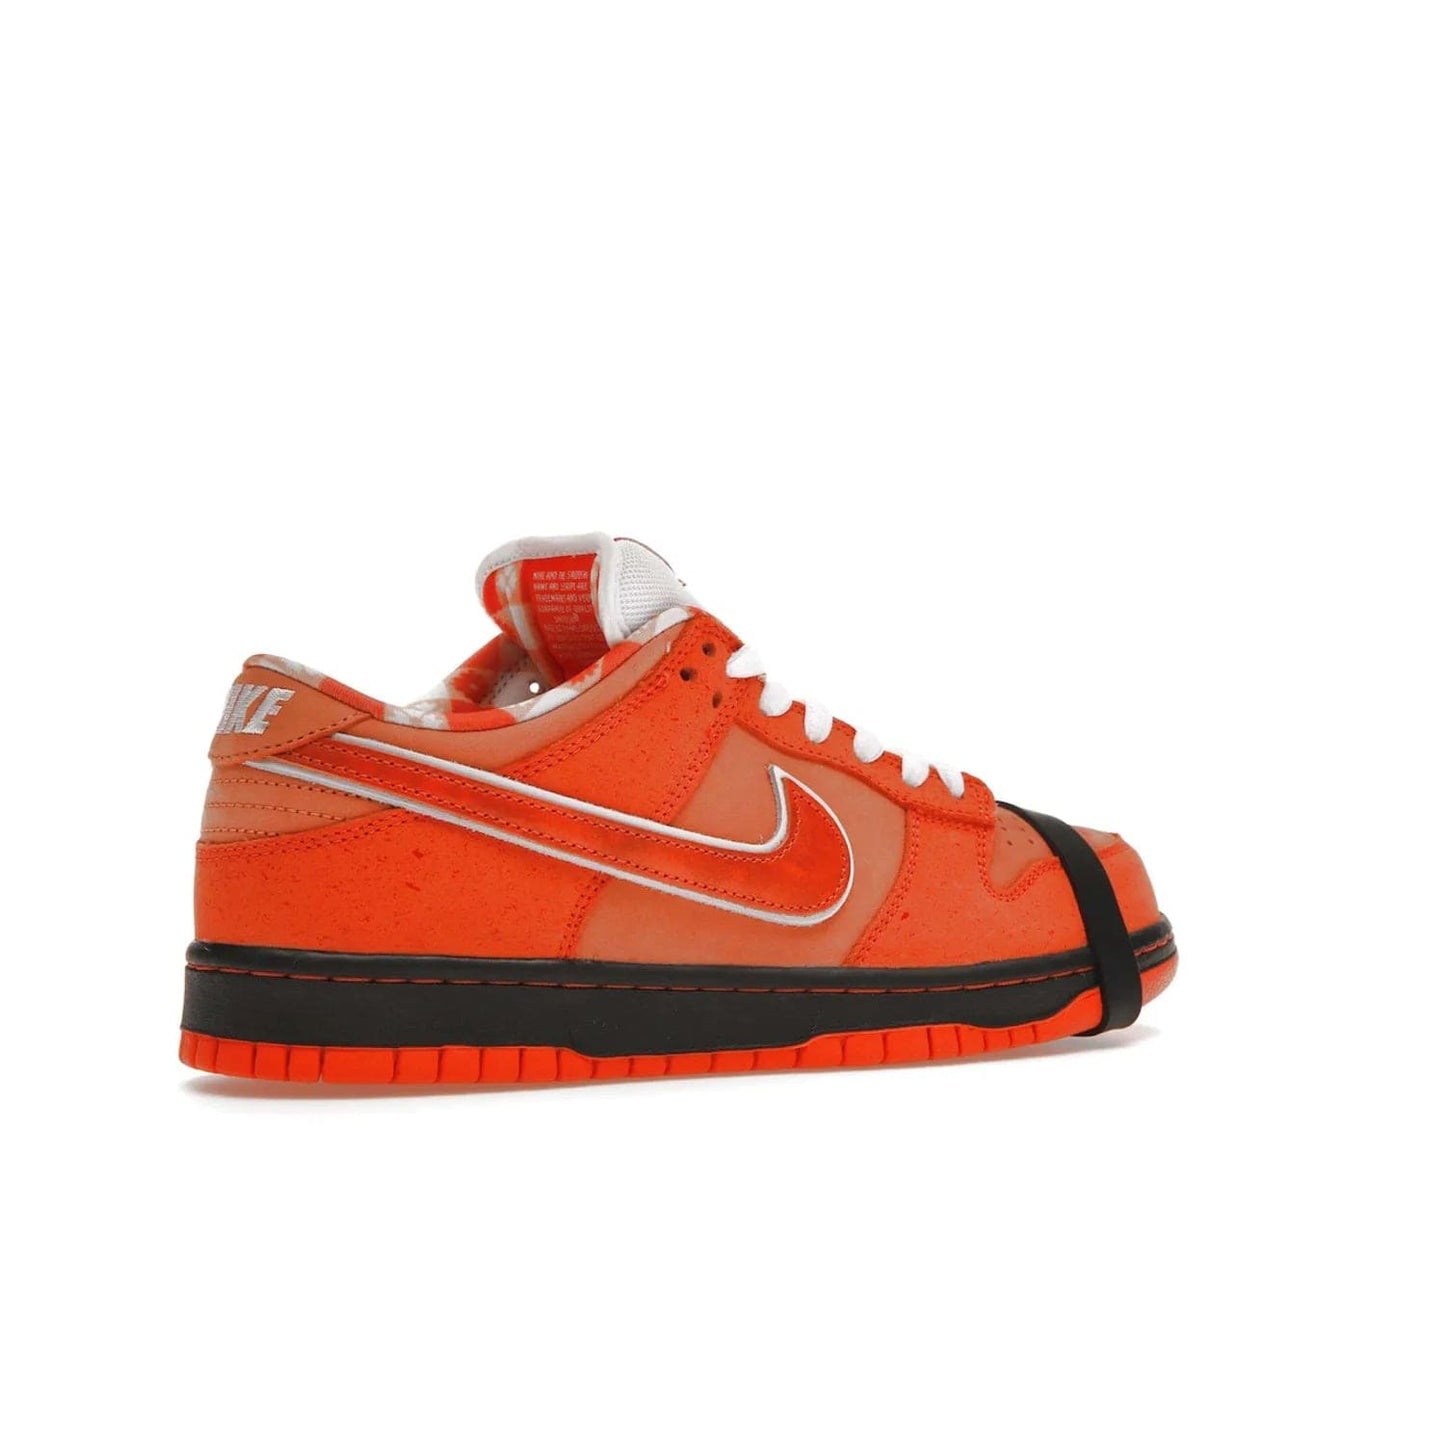 Nike SB Dunk Low Concepts Orange Lobster - Image 34 - Only at www.BallersClubKickz.com - Limited Nike SB Dunk Low Concepts Orange Lobster features premium nubuck upper with vibrant oranges for eye-catching colorblocked design. Signature Nike SB tag and bib-inspired interior for added texture. Outsole and cupsole provide extra reinforcement. Get it 12/20/2022.